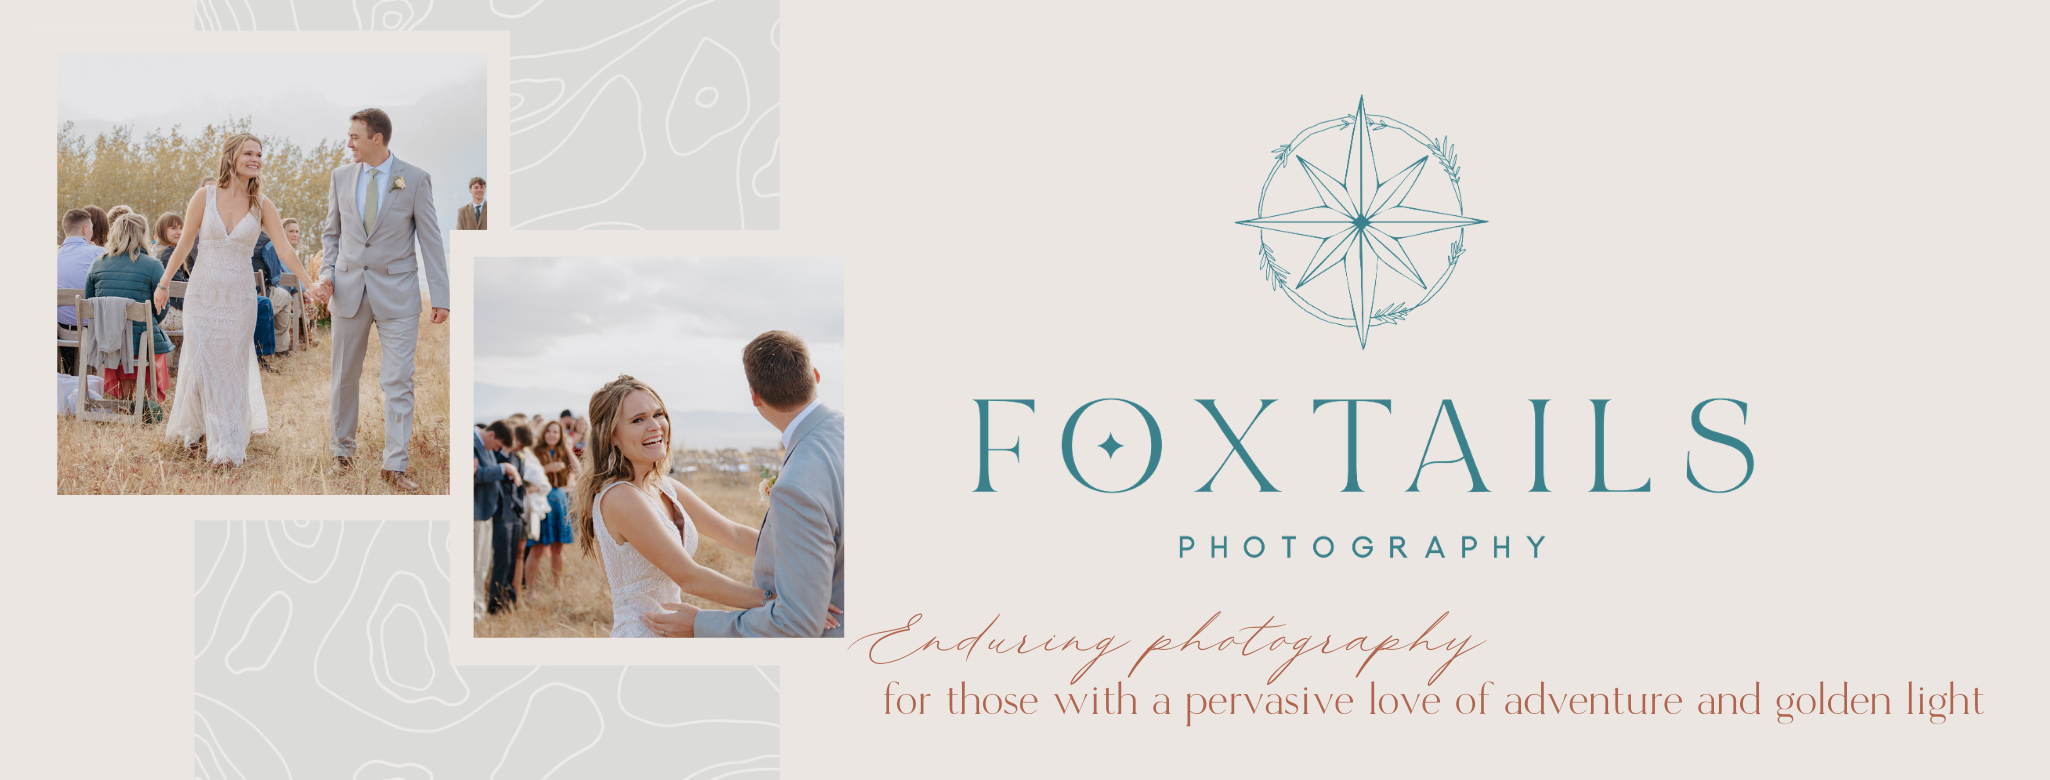 Foxtails Photography